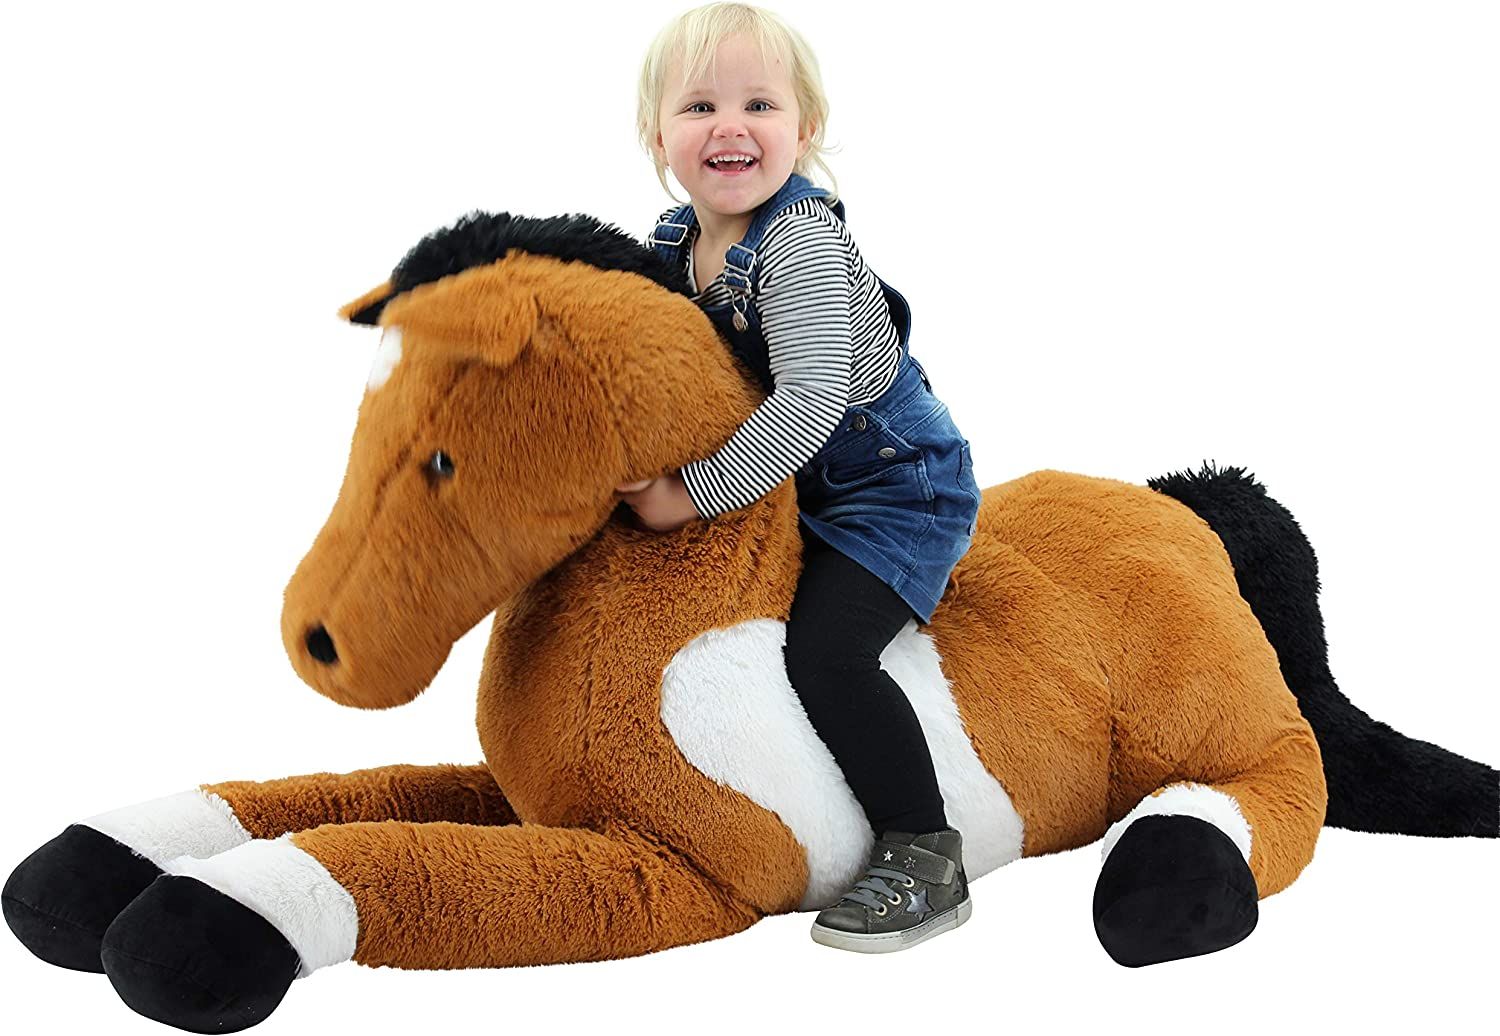 Null Sweety Toys XXL Plush Horse (Size 160 cm) - 10981 - Brown - sold new with p&hellip;